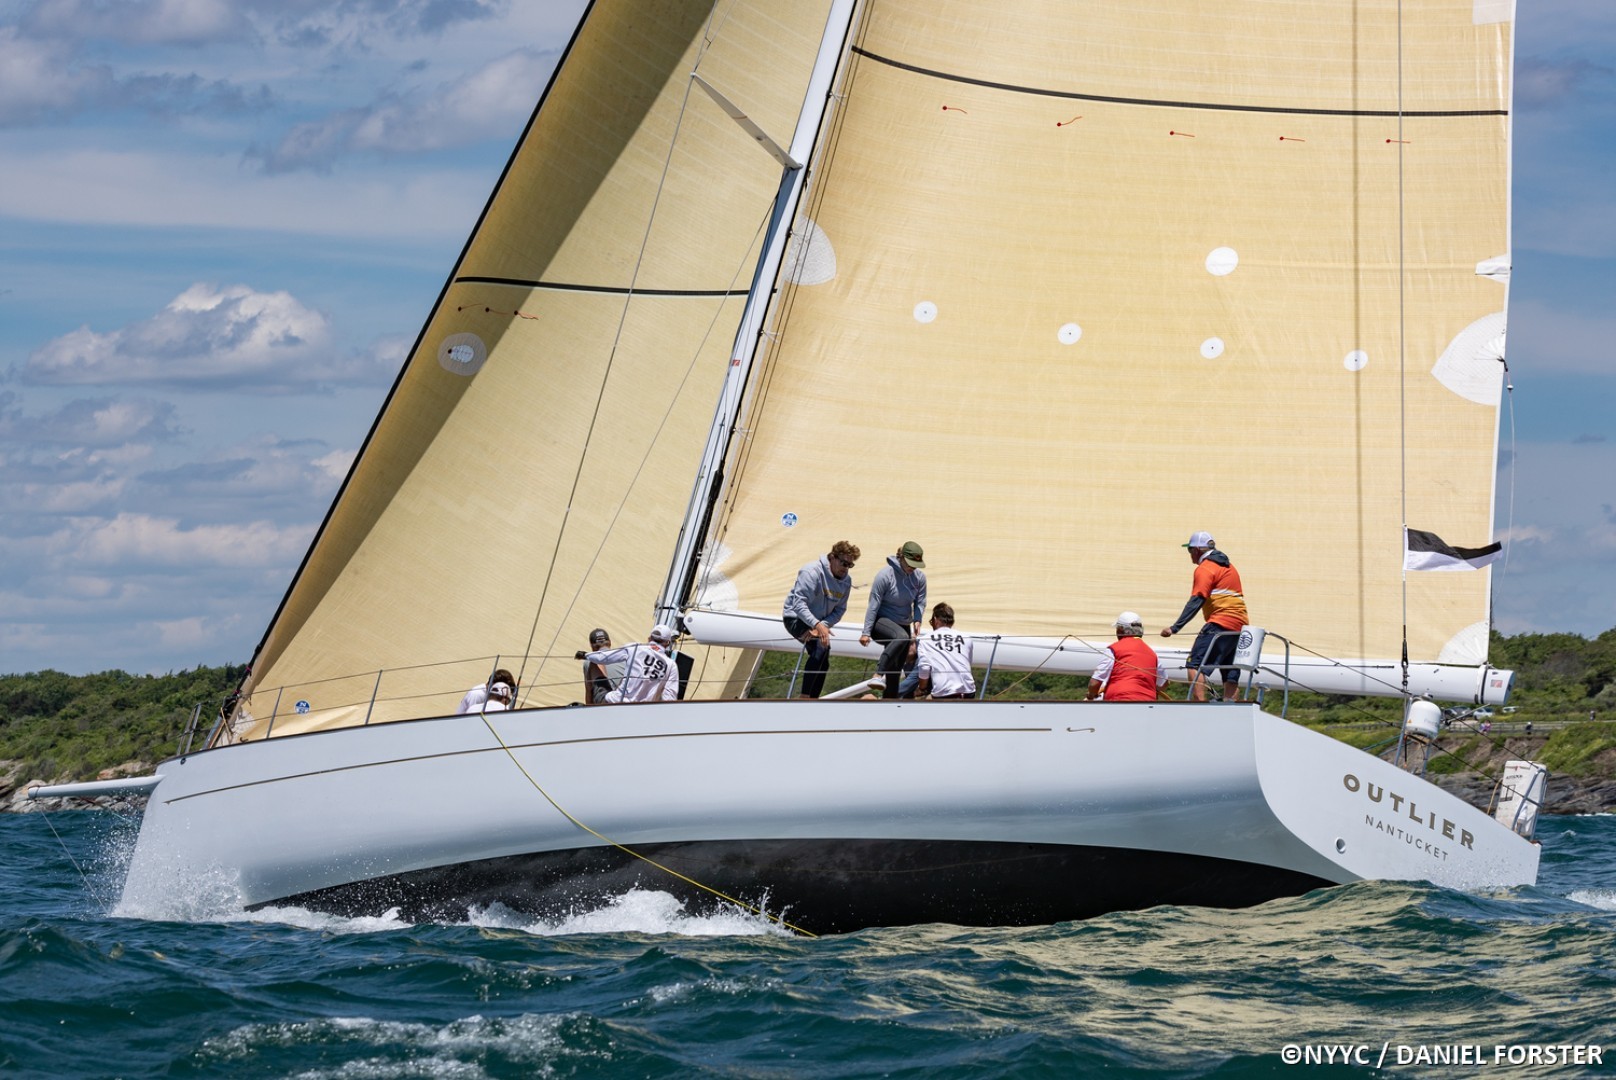 Outlier lives up to its name and mission with win at 168th Annual Regatta